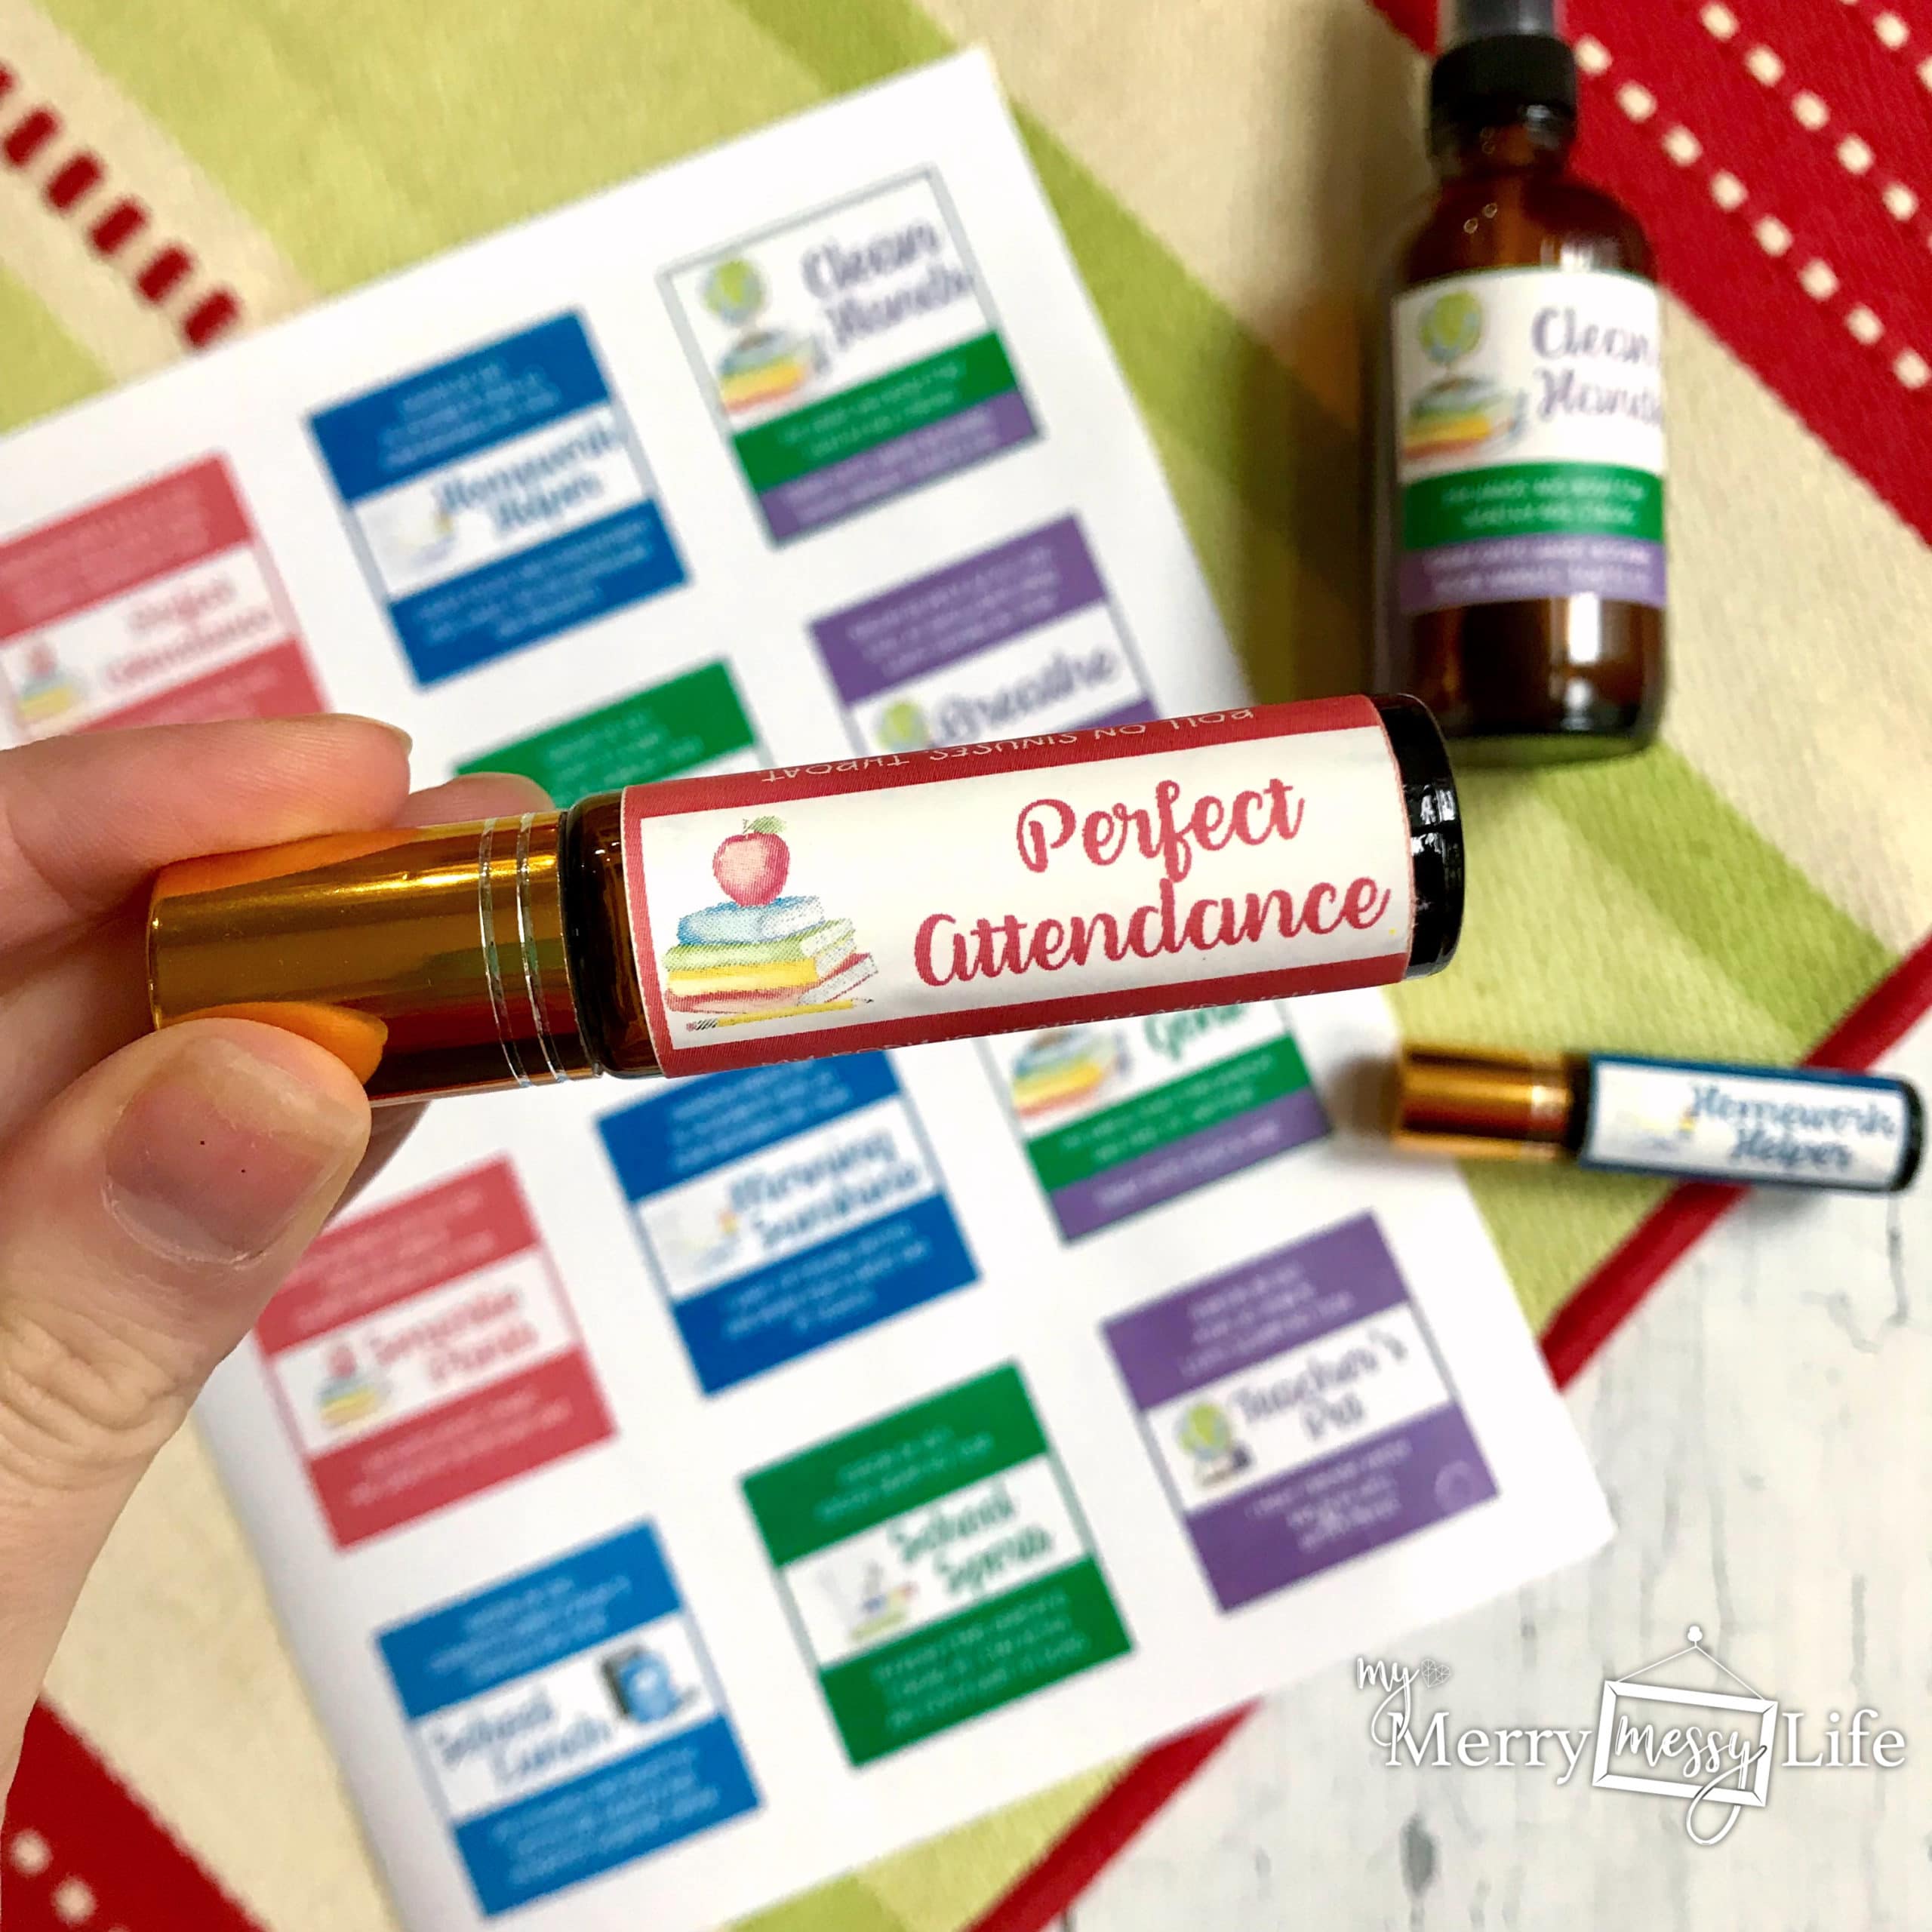 Perfect Attendance essential oil roller bottle recipe and label using Young Living essential oils